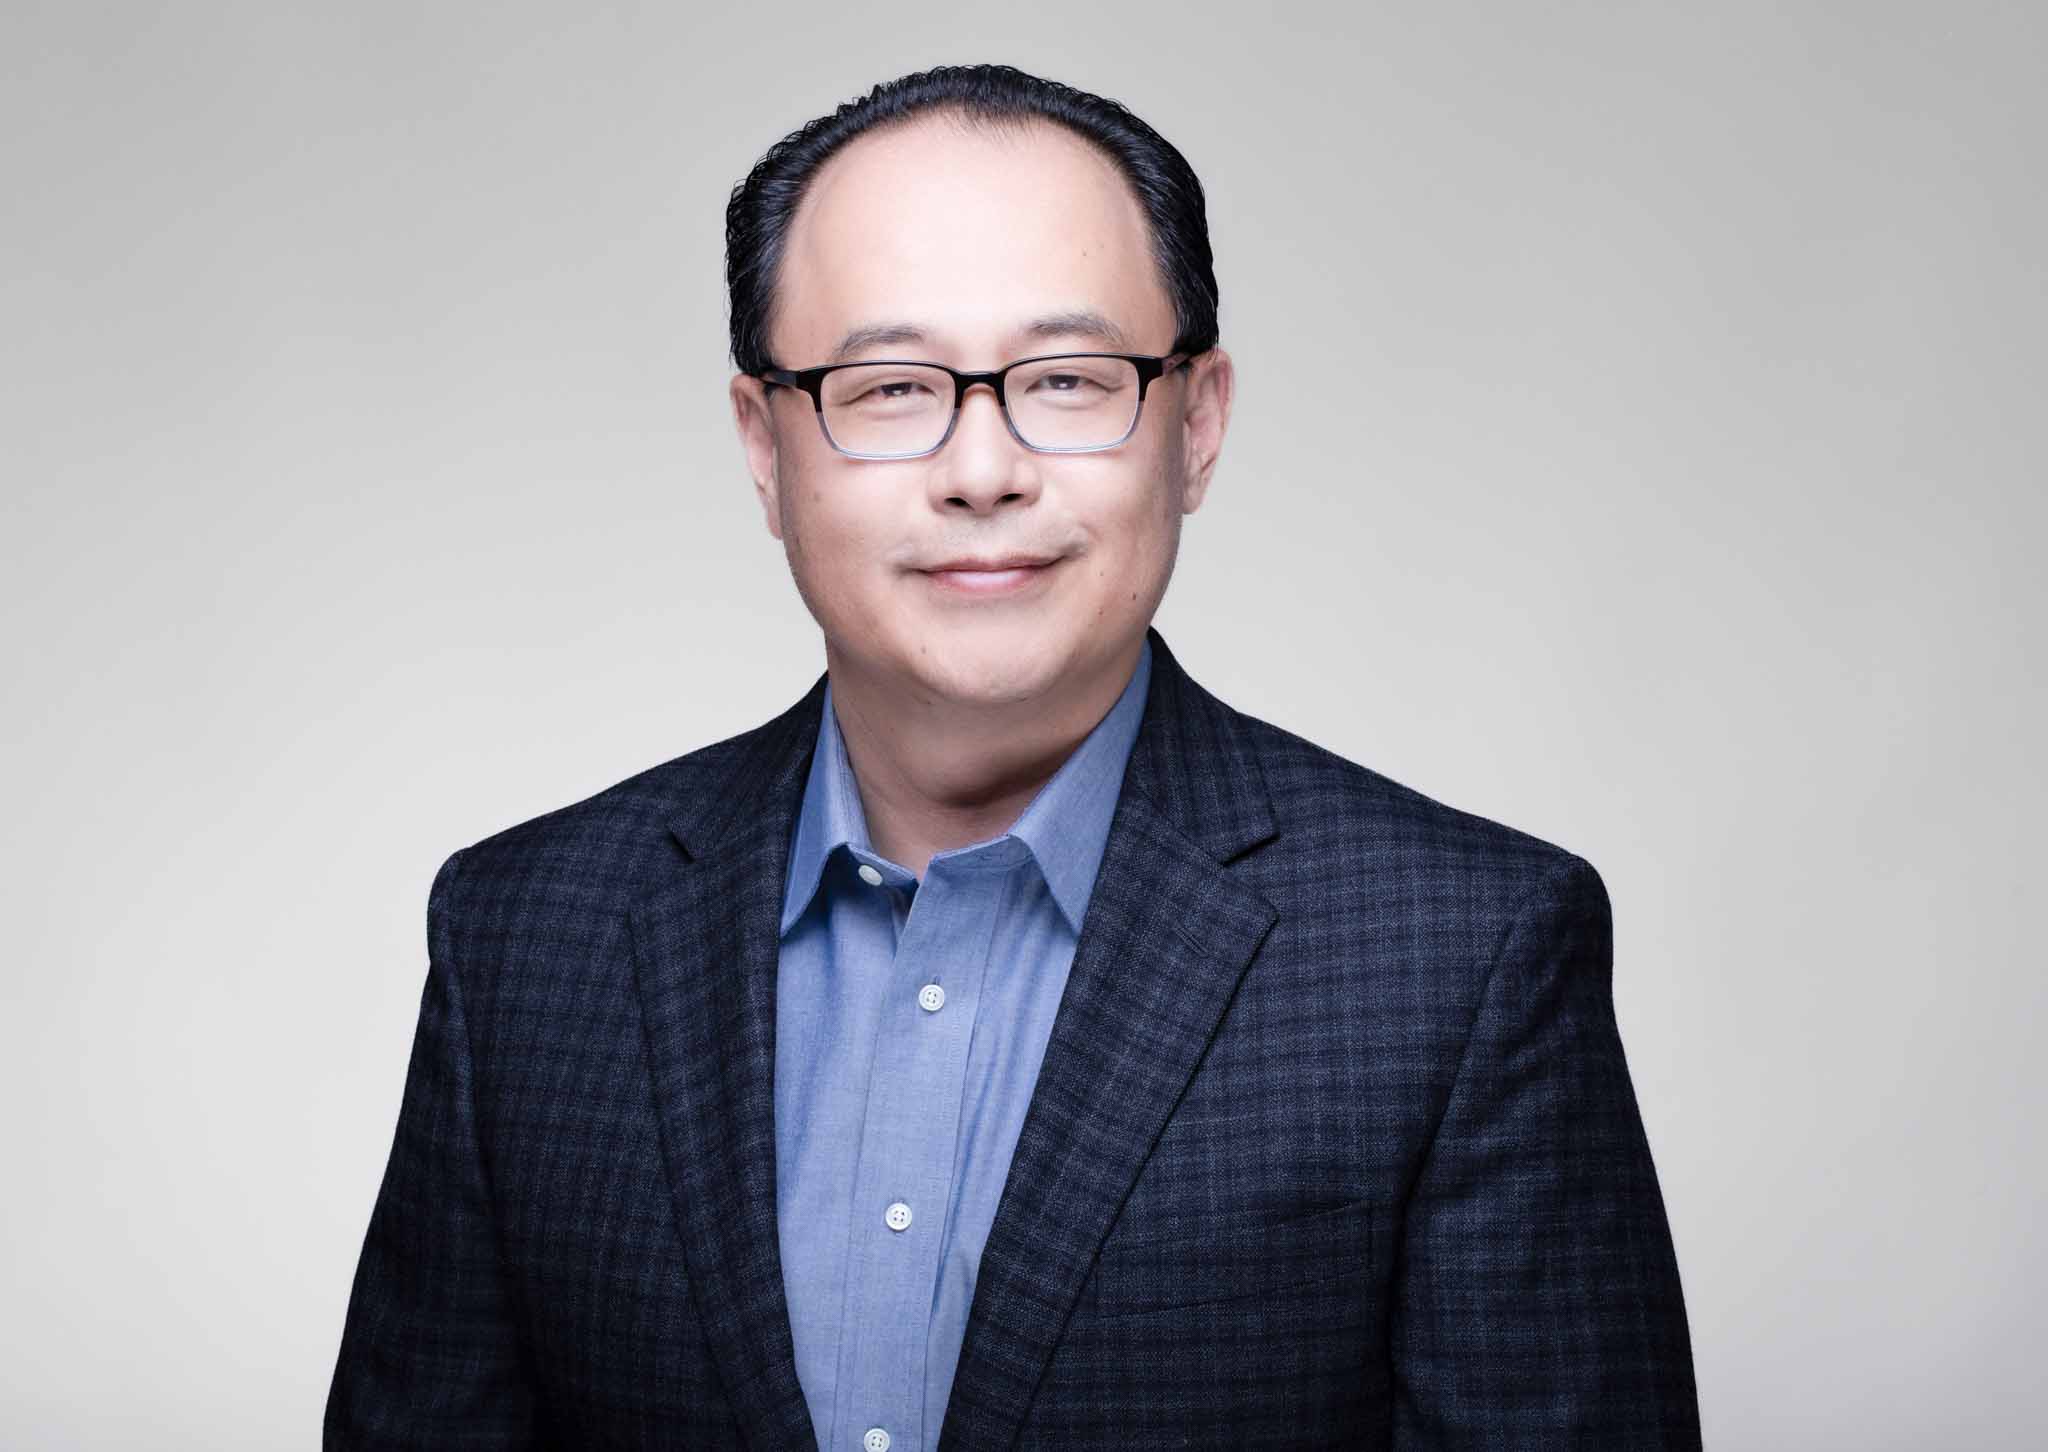 Hoang Nguyen, ACC’s Chief Technology Officer